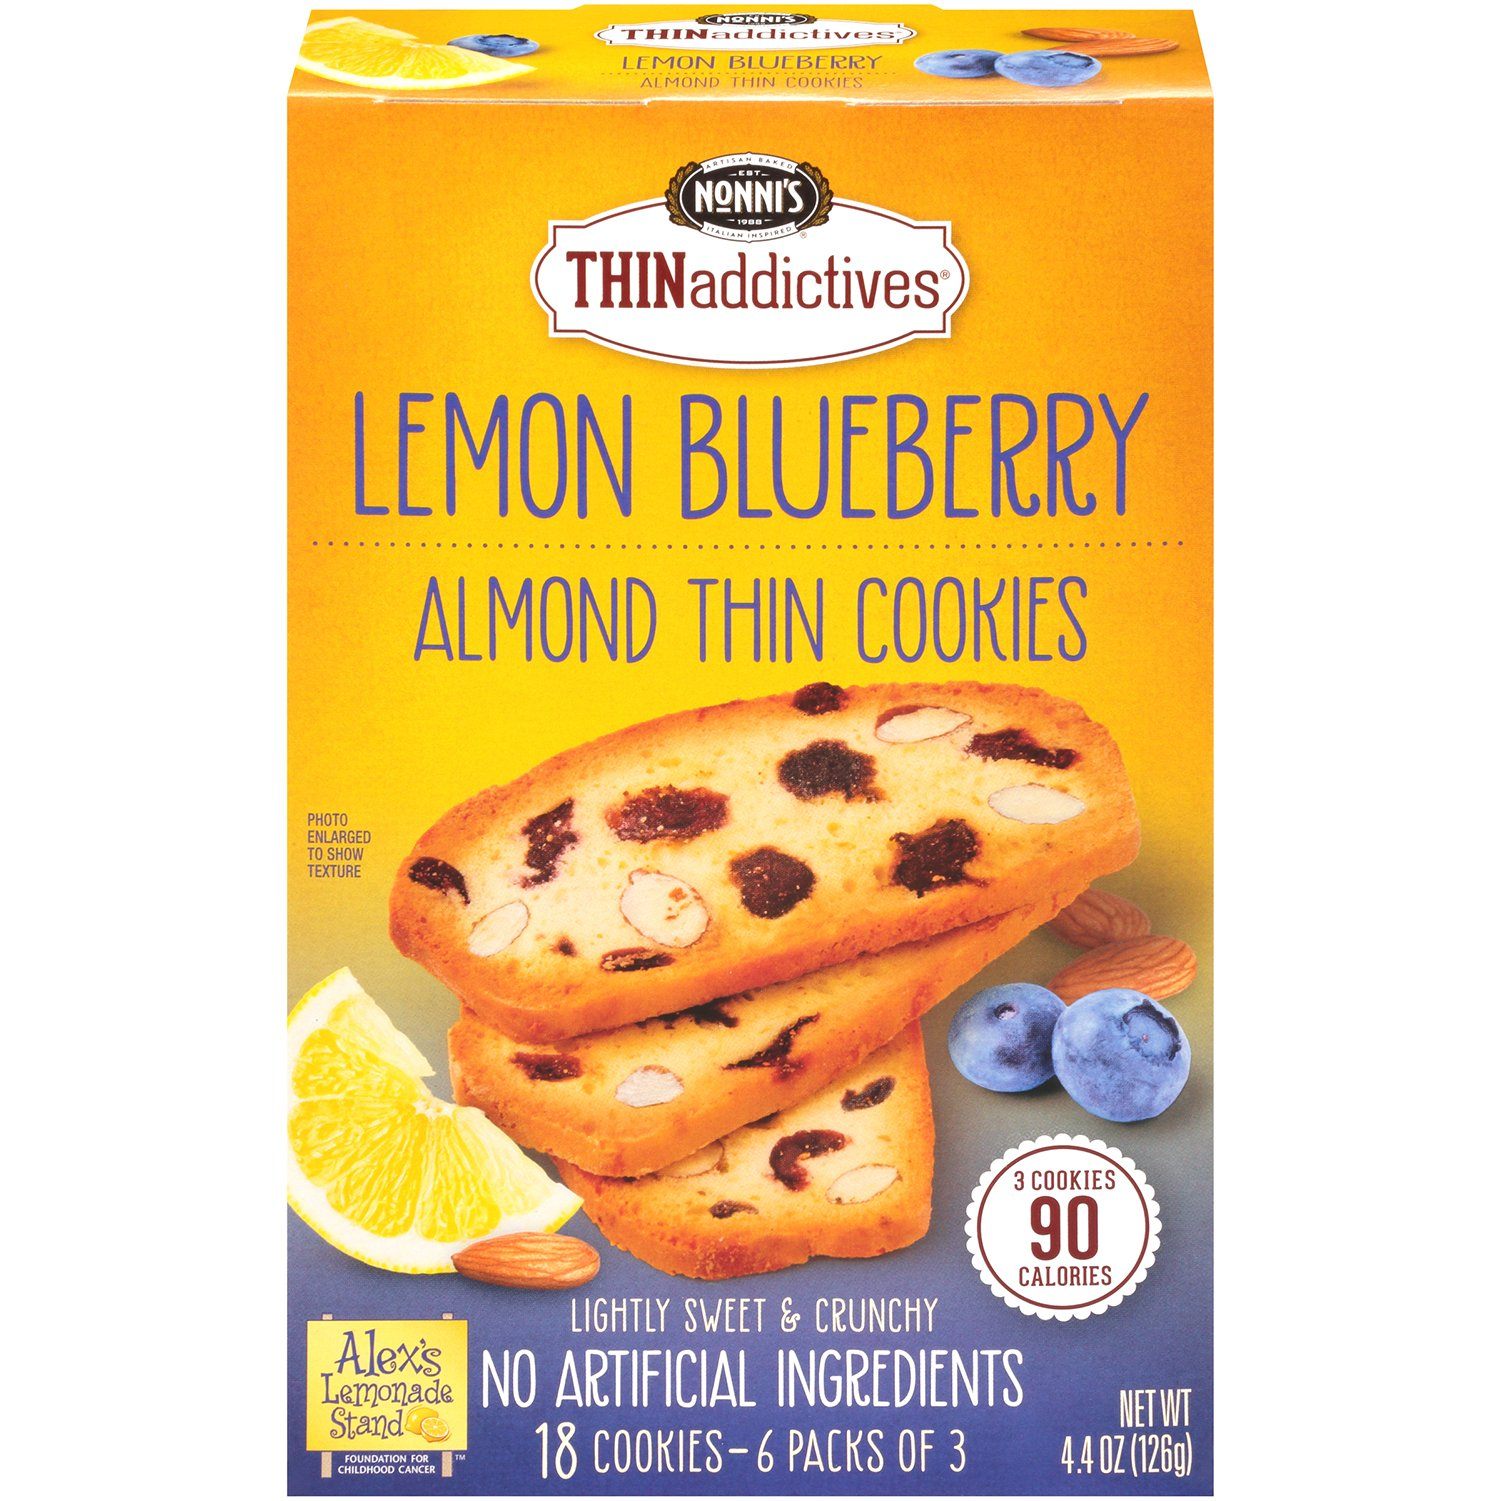 THINaddictives Almond Thin Cookies Nonni's Lemon Blueberry 18 Cookies 